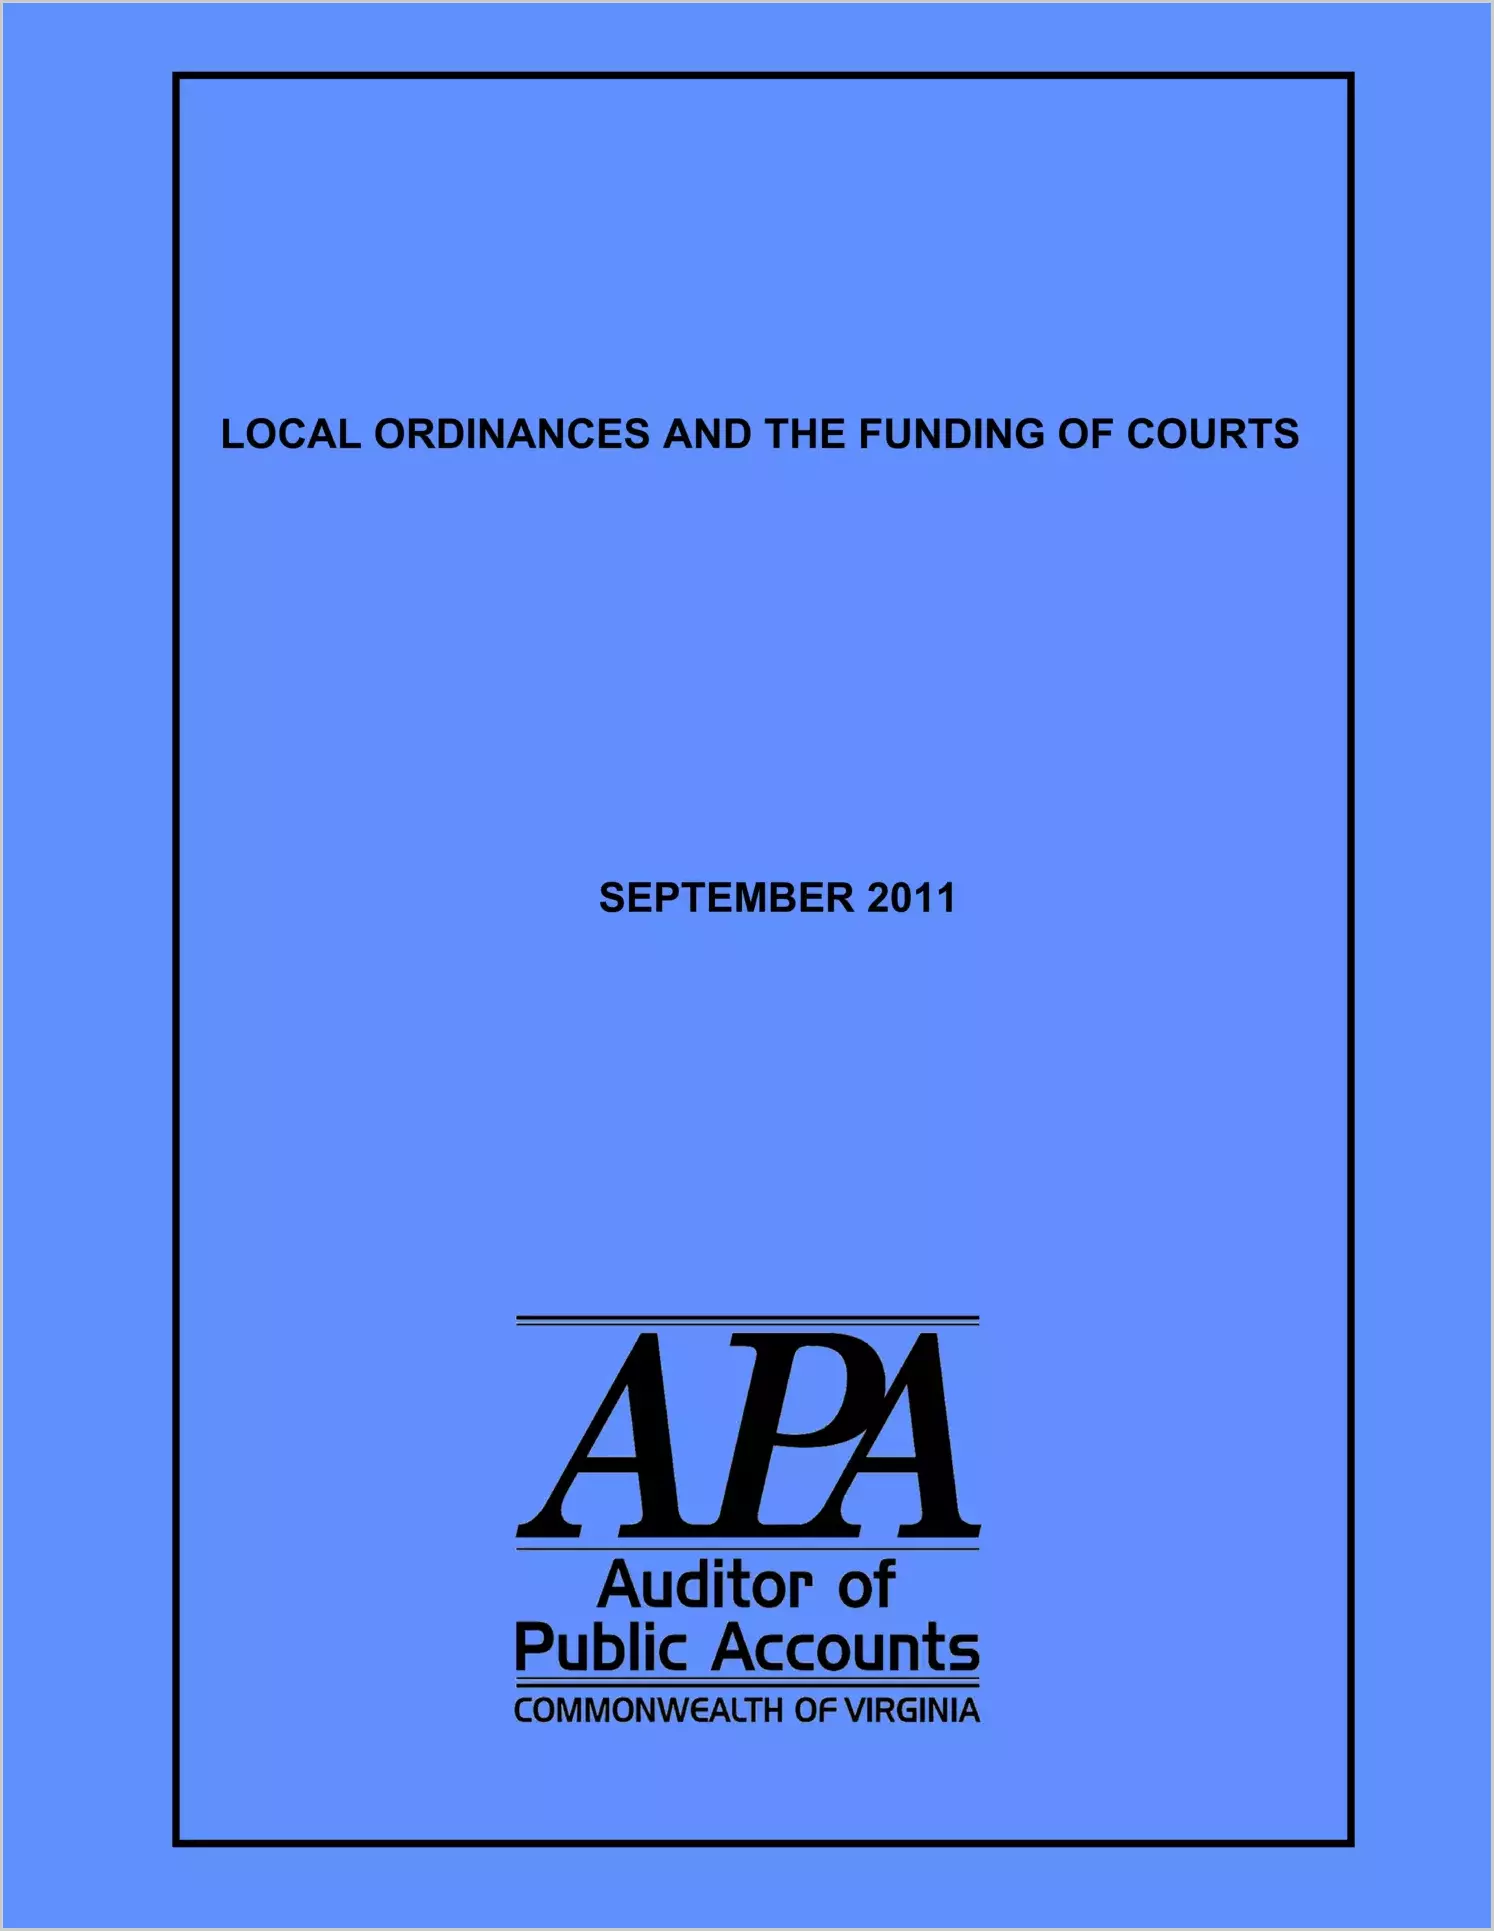 Local Ordinances and the Funding of Courts as of September 2011